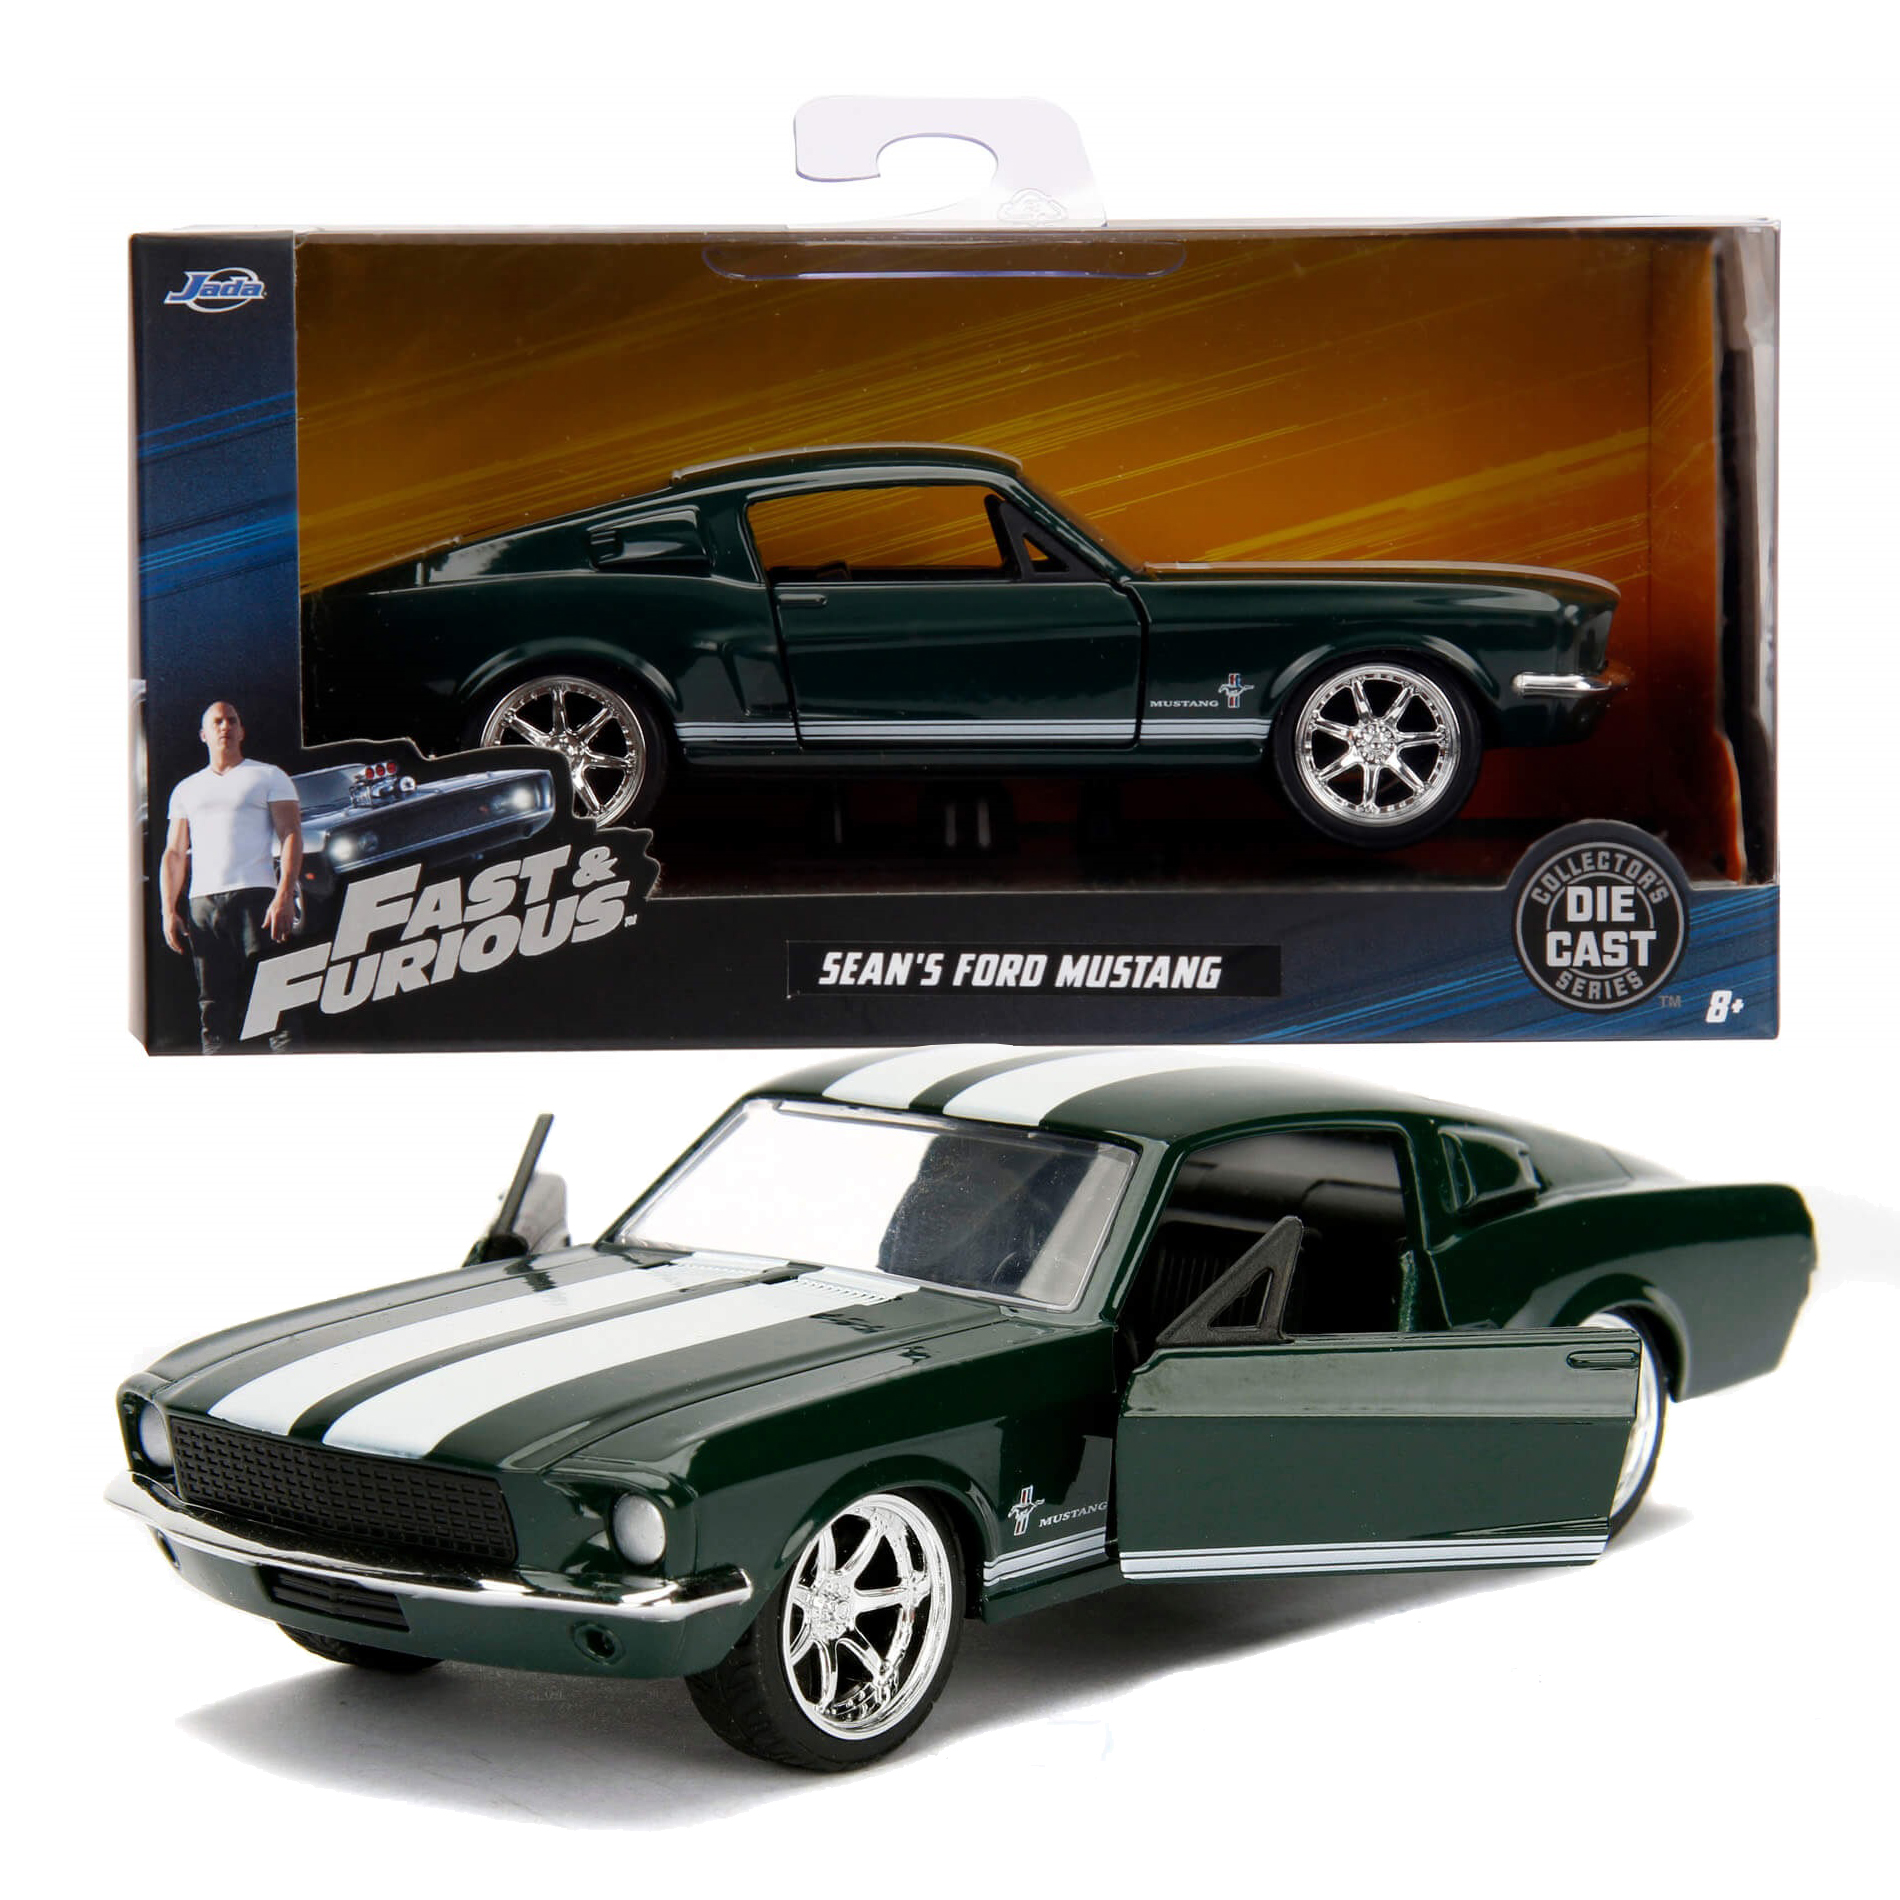 Jada Toys Fast & Furious Collection: Sean's 1967 Ford Mustang 1/32 Scale